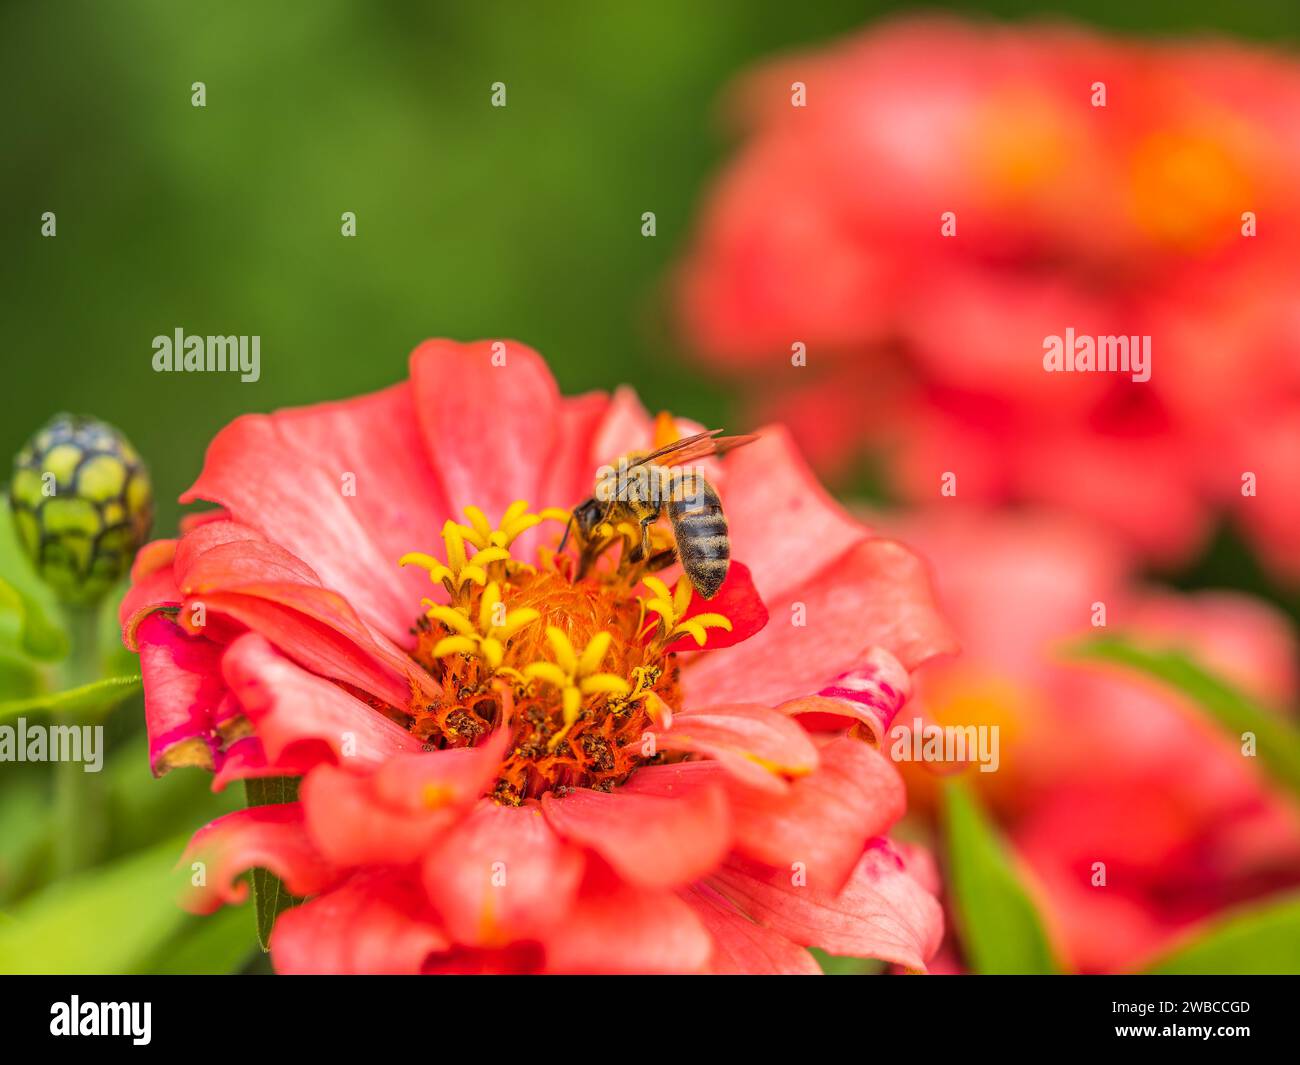 A bee collects nectar from Red marigolds flower in the garden in summer close-up. Blooming tagetes flower with red petals in summer, close-up photo. Stock Photo